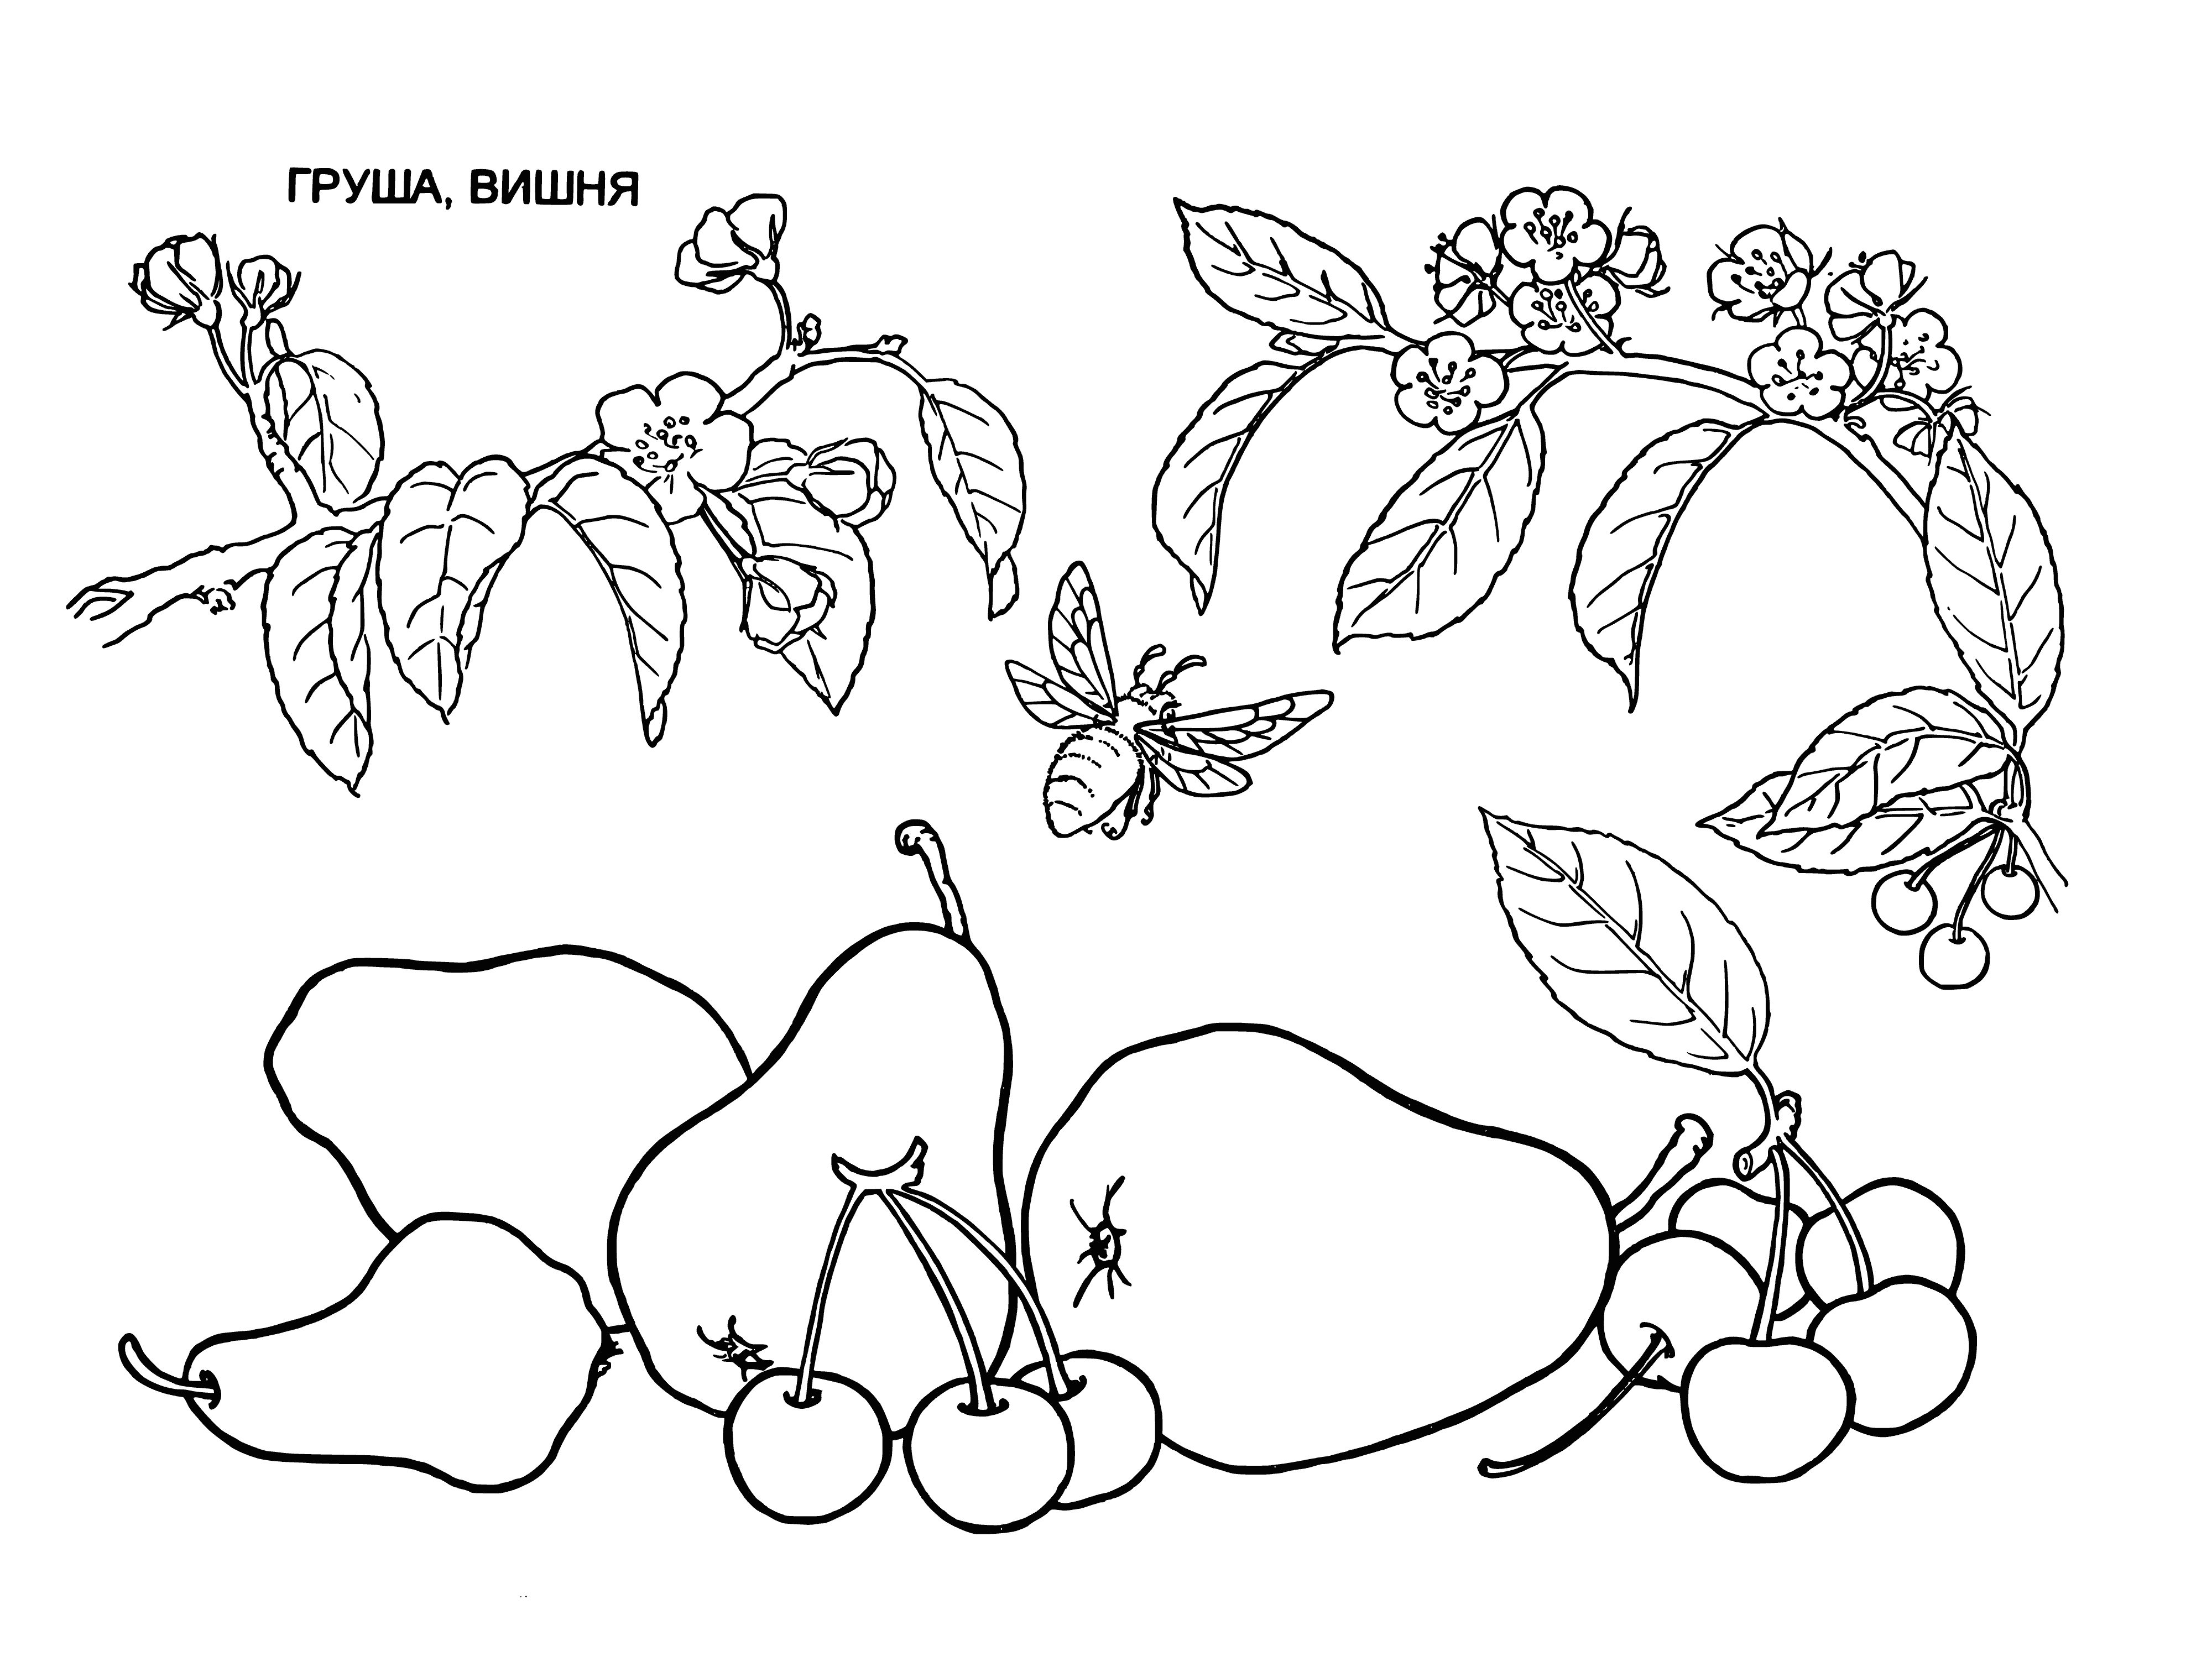 coloring page: Fruit coloring page has a pear and cherry, pear is larger and lighter, cherry is smaller and darker.